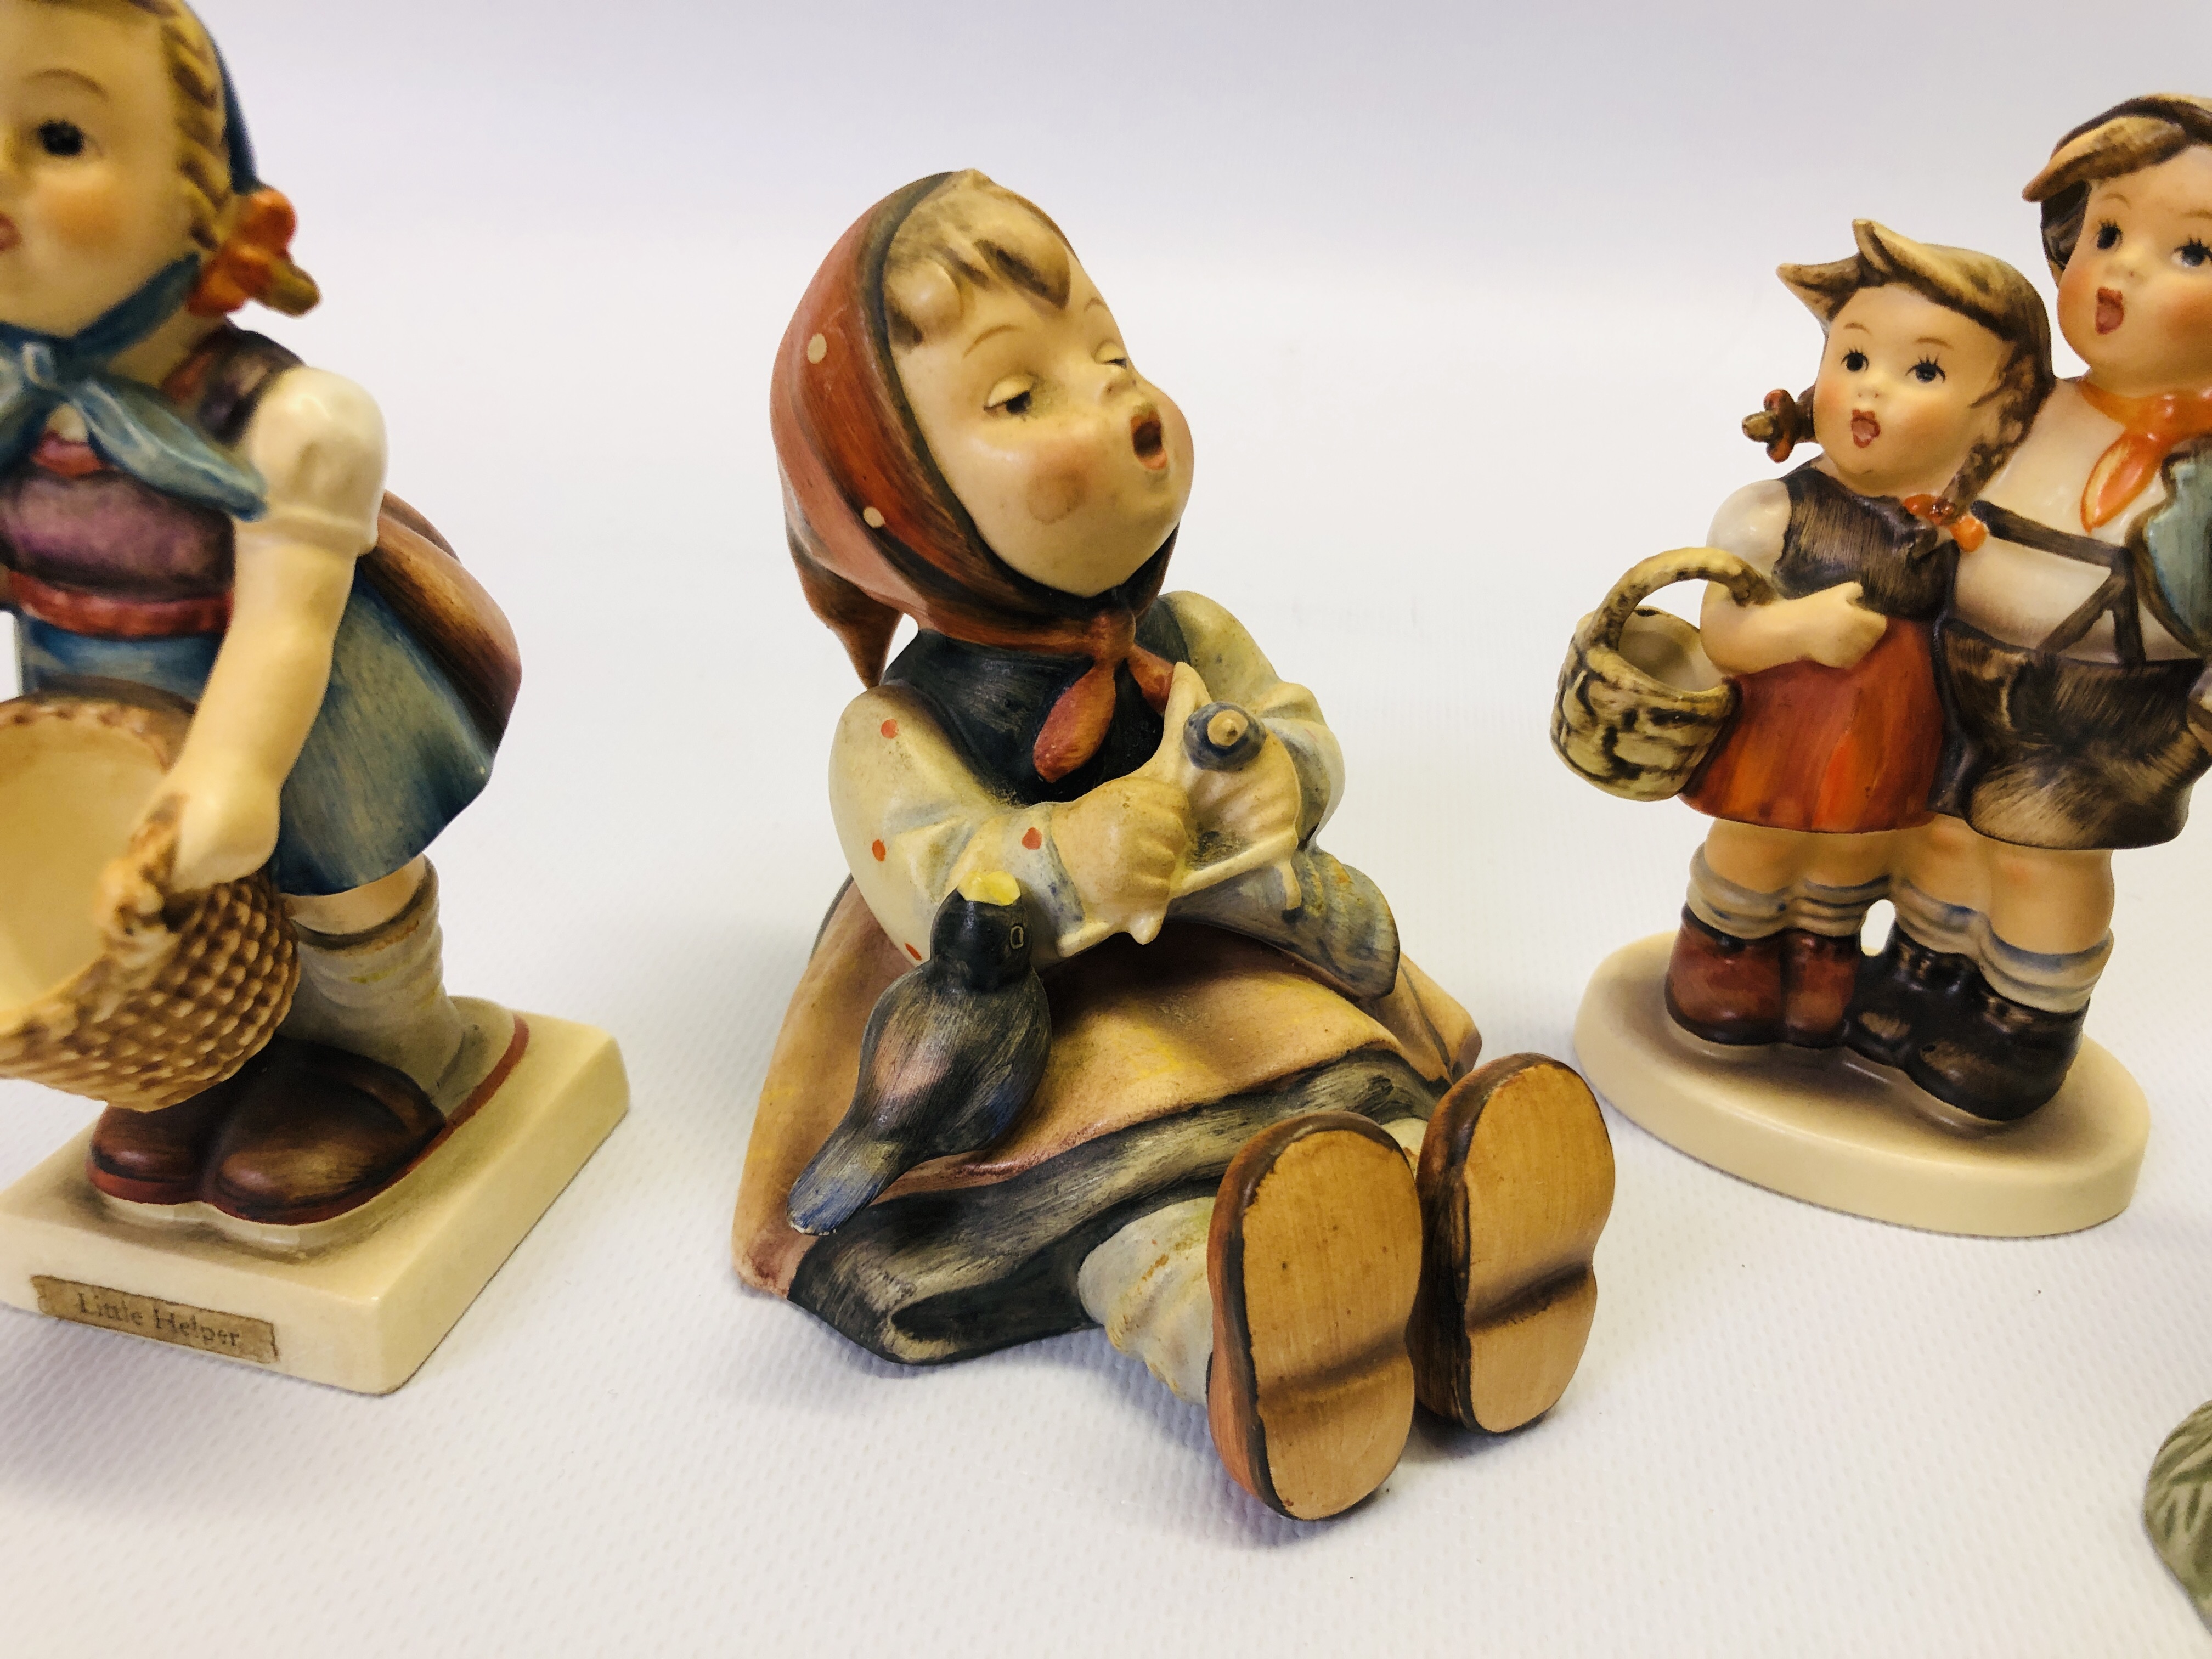 A GROUP OF 6 ASSORTED "GOEBEL" CABINET ORNAMENTS T O INCLUDE "LITTLE HELPER" NATURES PRAYER BH55 - Image 3 of 10